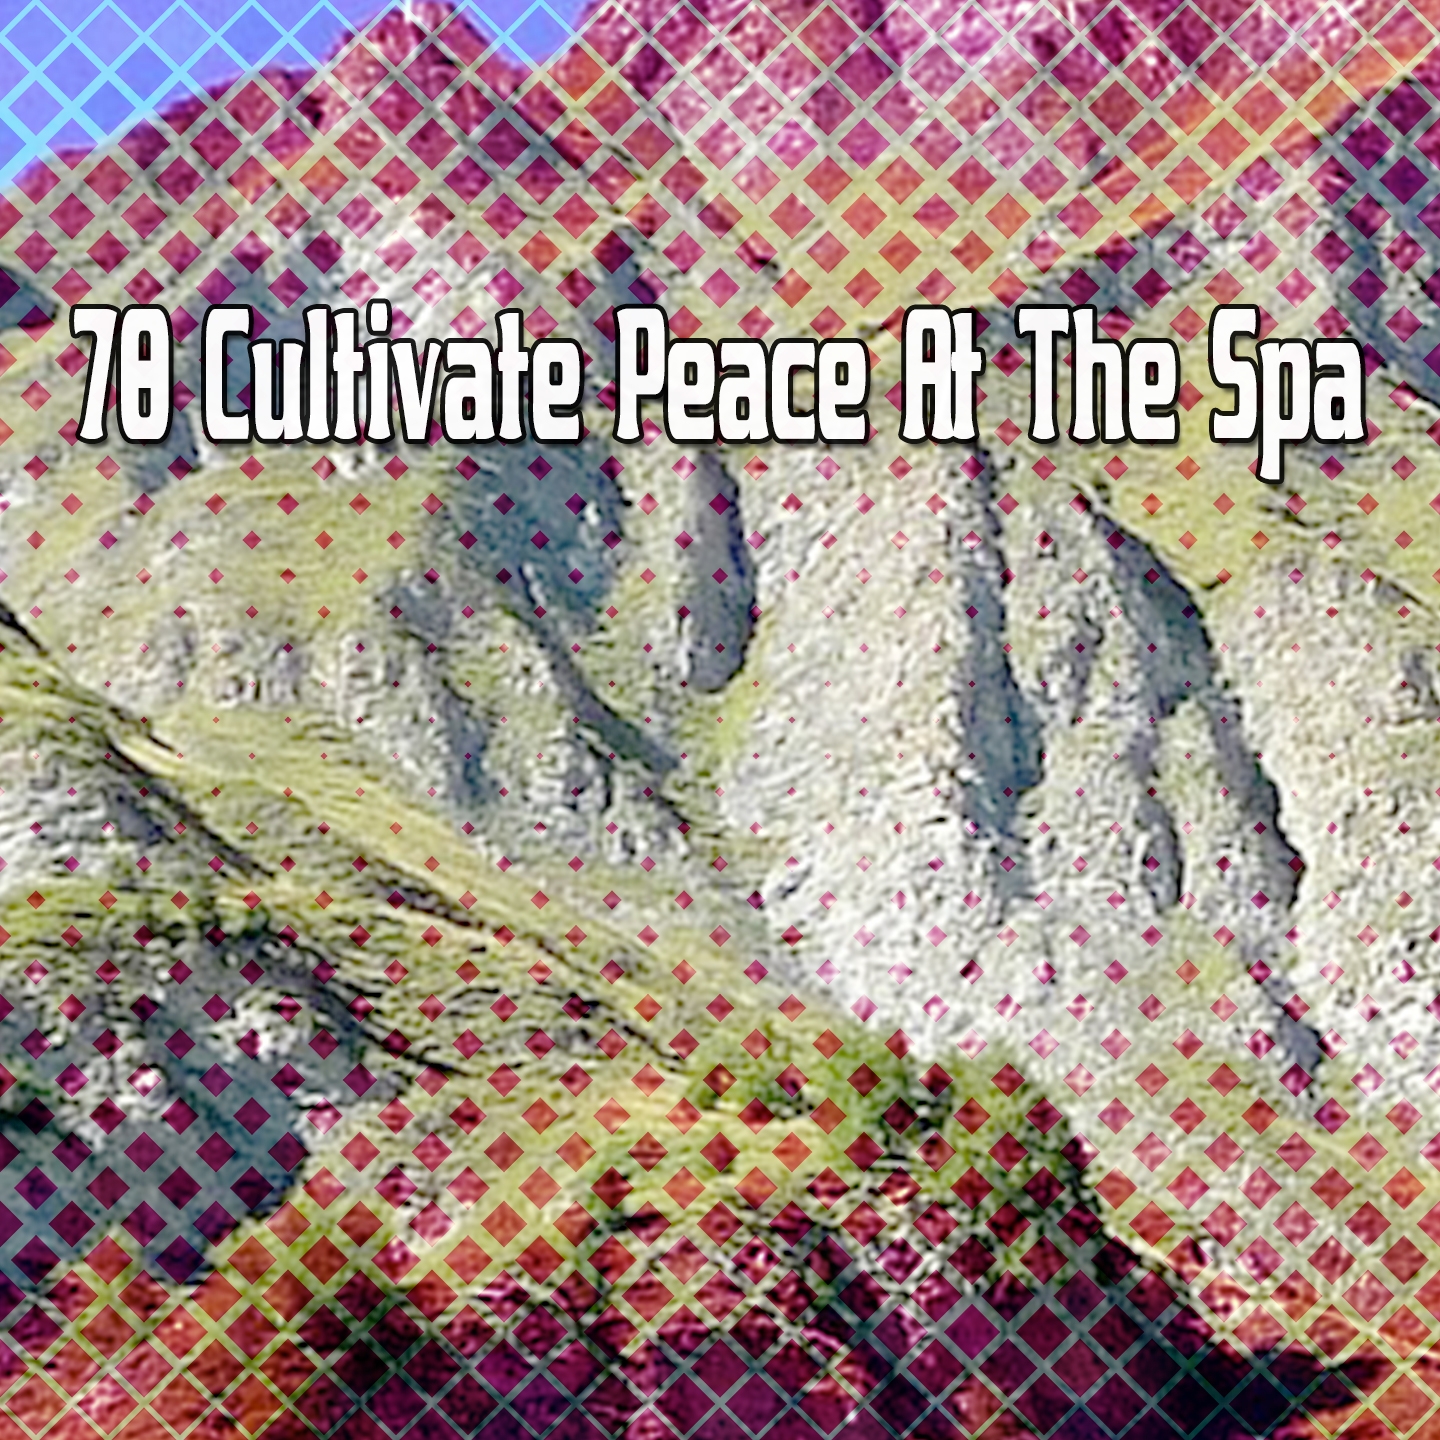 70 Cultivate Peace At The Spa